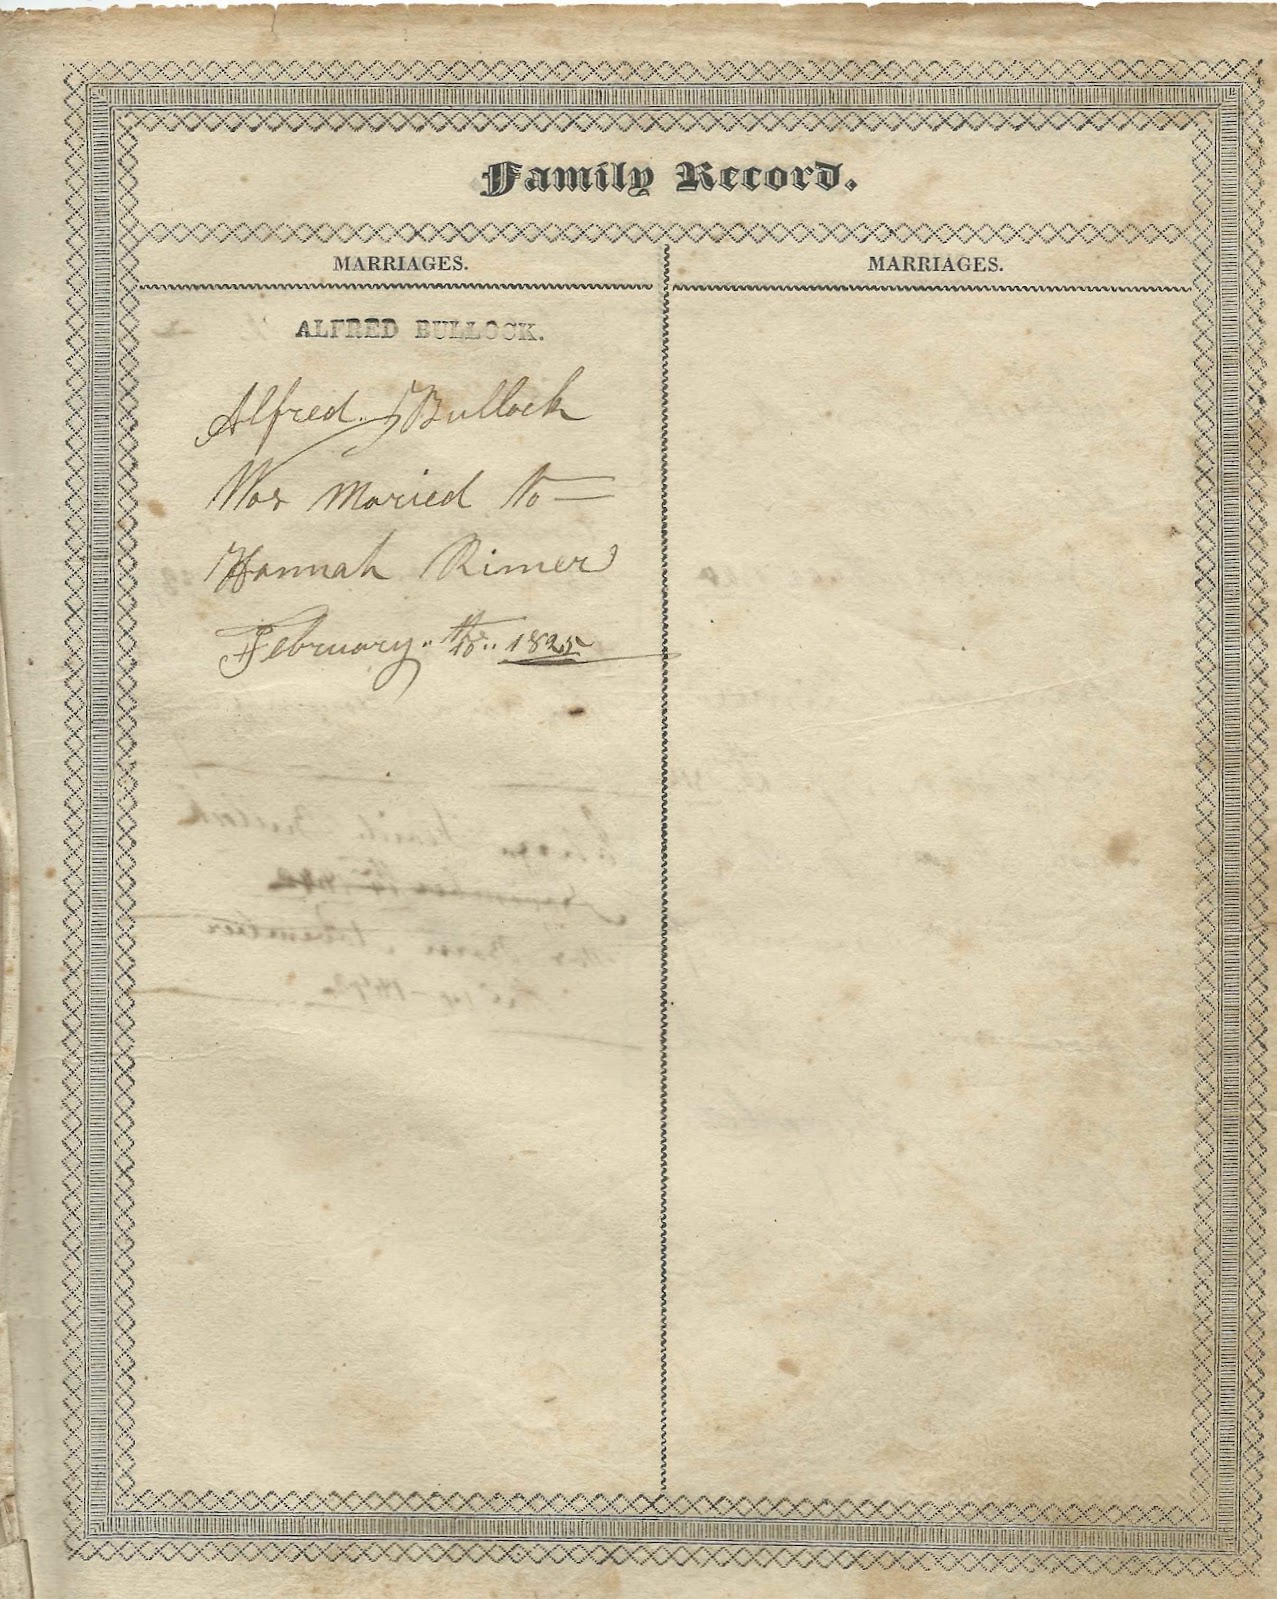 Heirlooms Reunited: Family Bible with Records of Alfred Bullock and ...